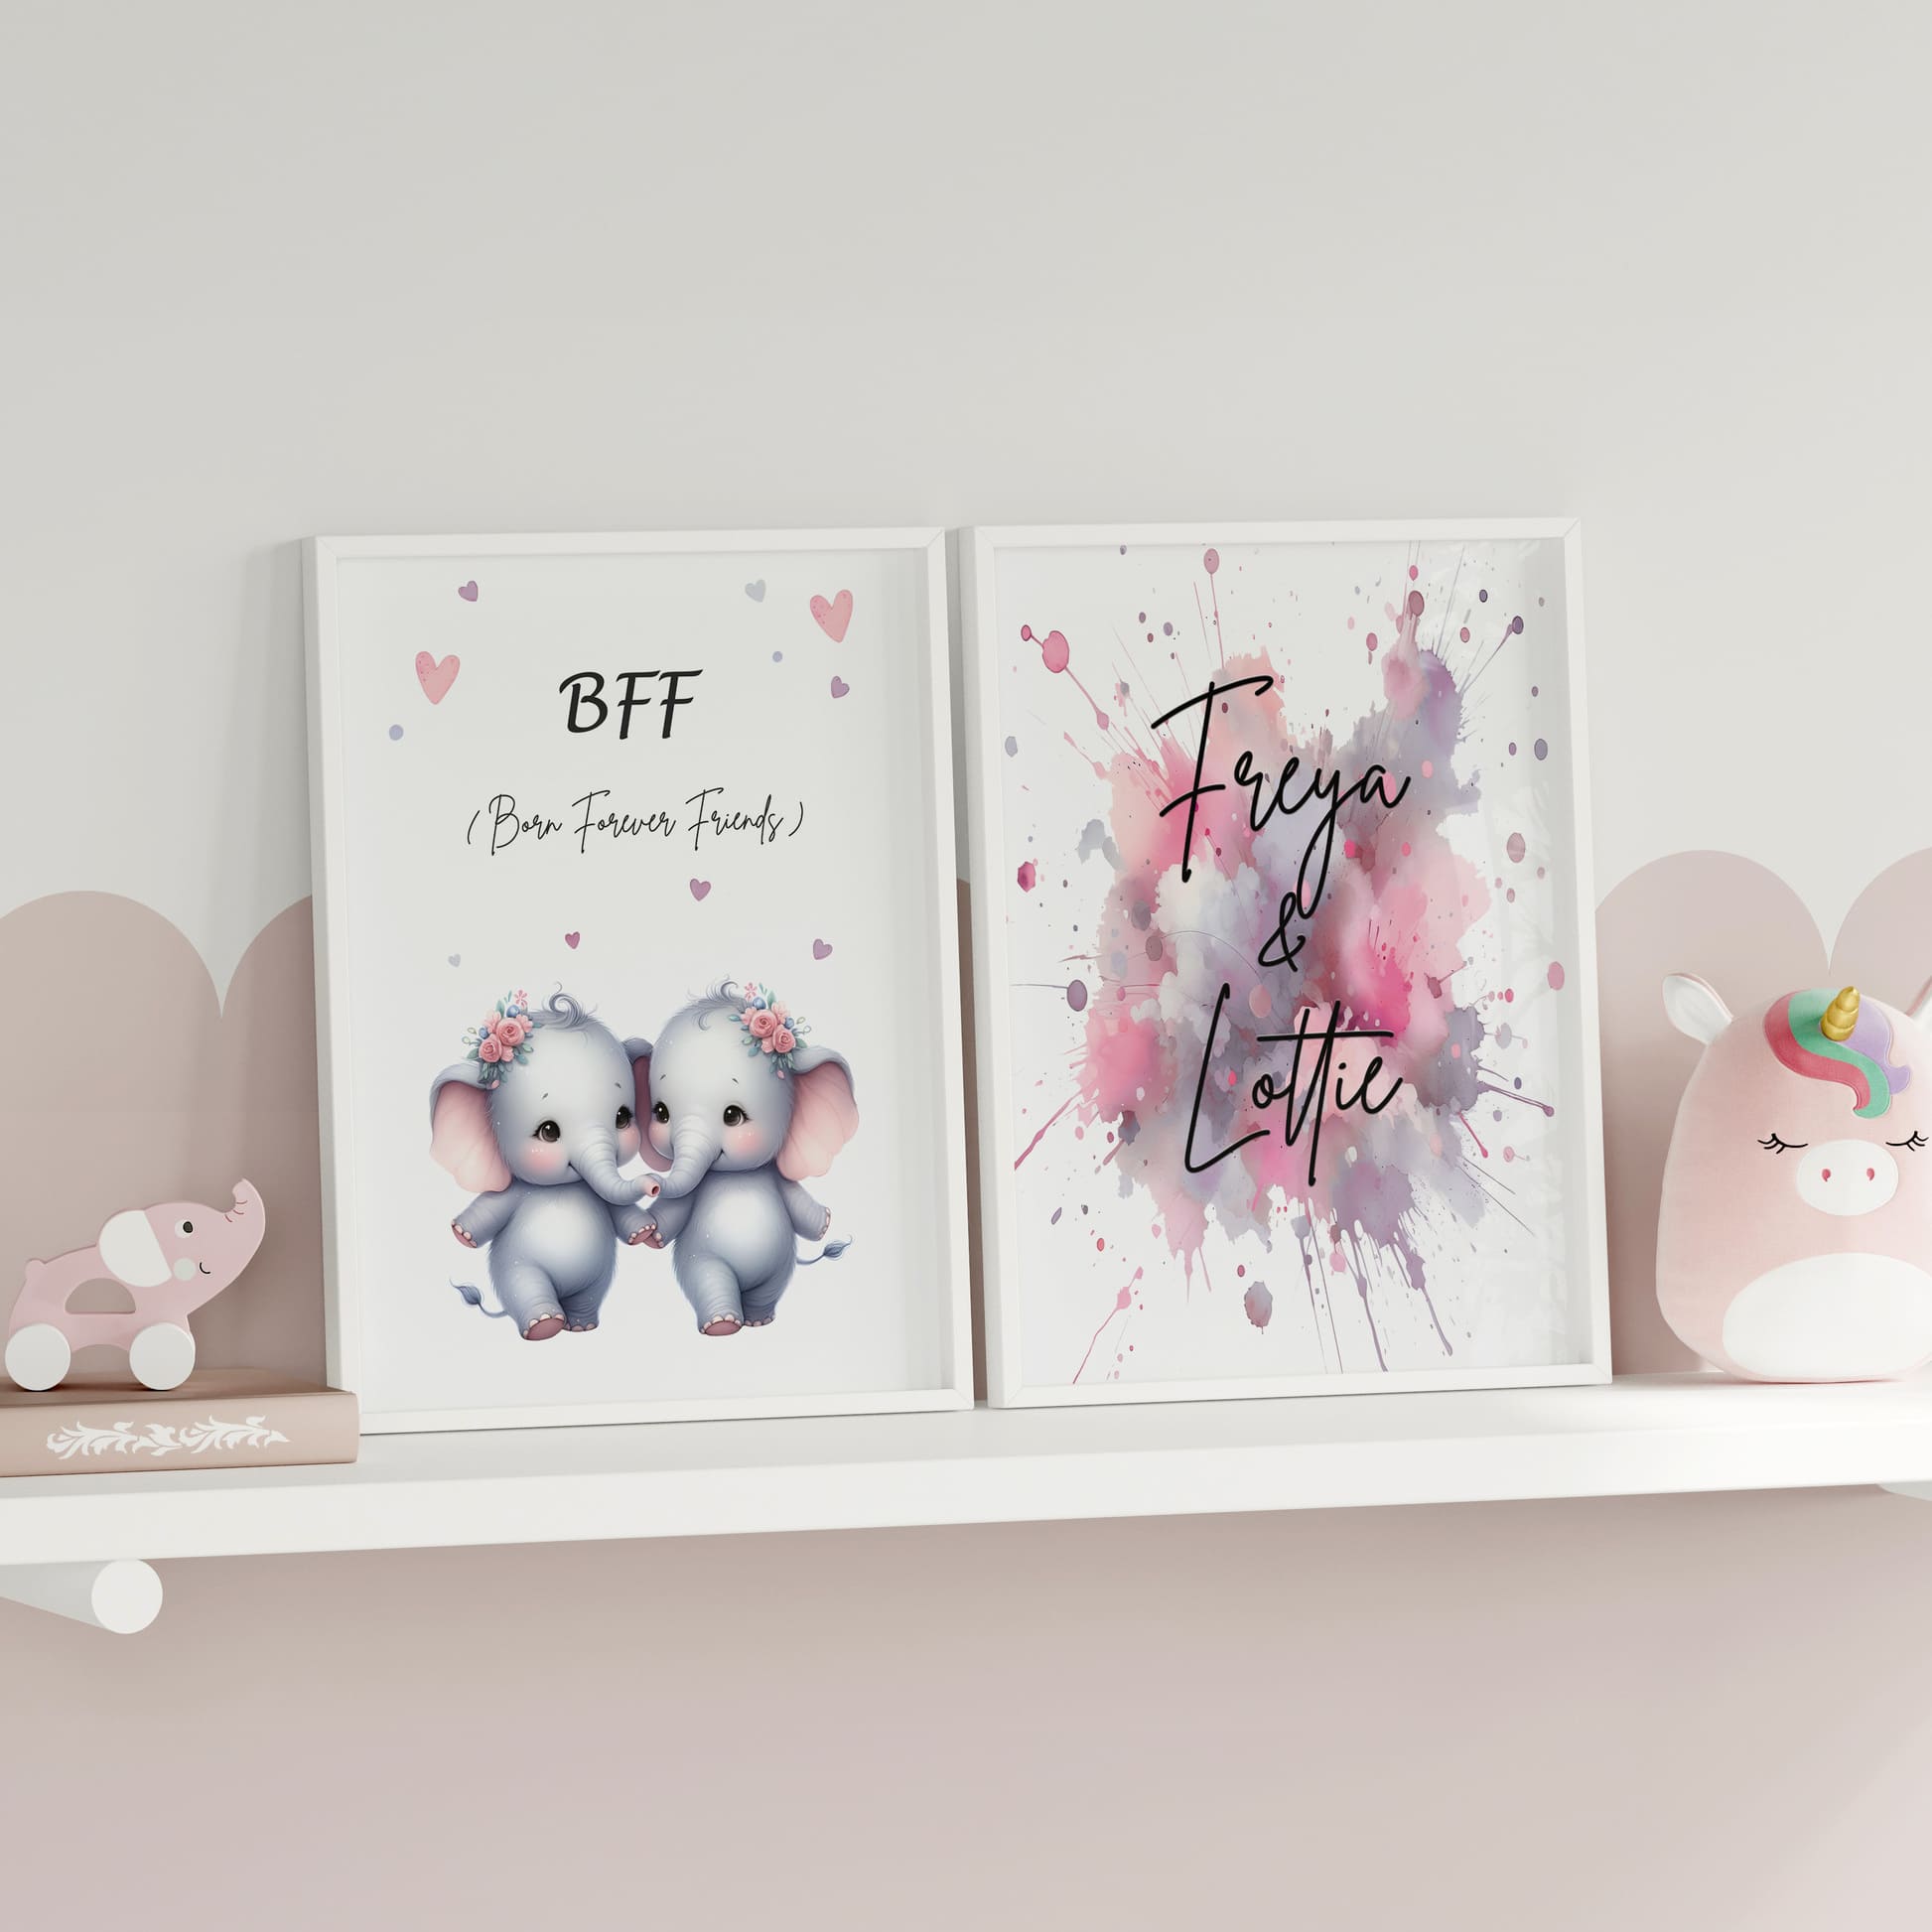 Two A4 Prints. One showing 2 cartoon twin girl elephants and reads "BFF Born Forever Friends". The other print has pink watercolour splatters, with children's name in black writing across it